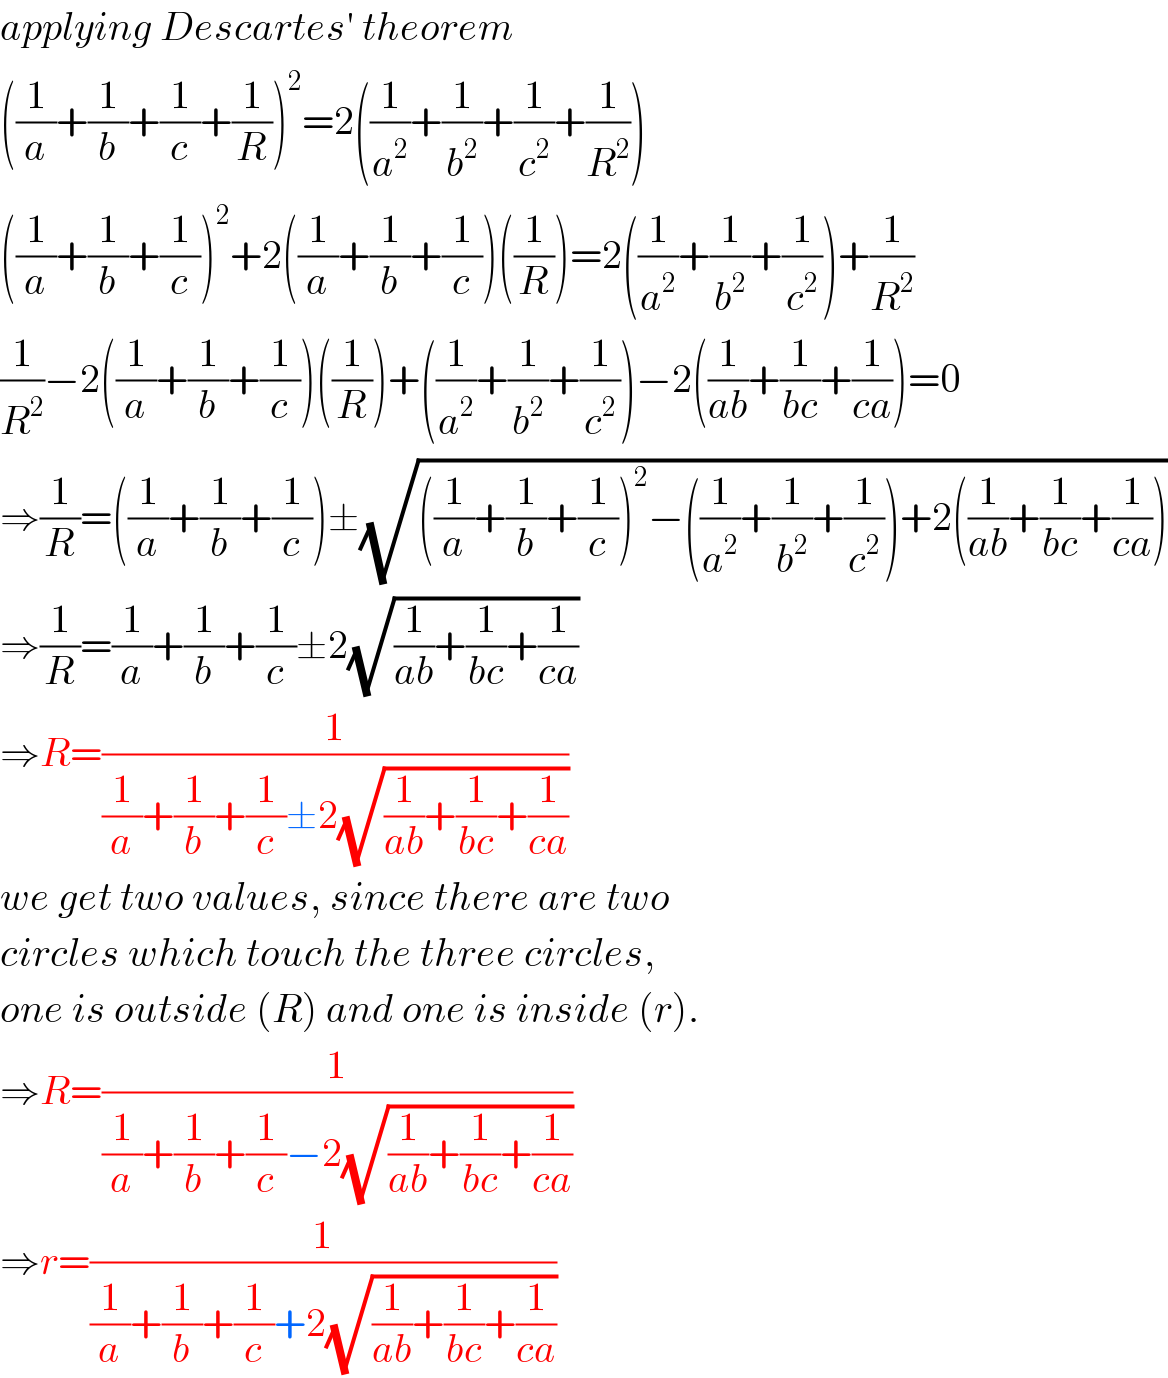 applying Descartes′ theorem  ((1/a)+(1/b)+(1/c)+(1/R))^2 =2((1/a^2 )+(1/b^2 )+(1/c^2 )+(1/R^2 ))  ((1/a)+(1/b)+(1/c))^2 +2((1/a)+(1/b)+(1/c))((1/R))=2((1/a^2 )+(1/b^2 )+(1/c^2 ))+(1/R^2 )  (1/R^2 )−2((1/a)+(1/b)+(1/c))((1/R))+((1/a^2 )+(1/b^2 )+(1/c^2 ))−2((1/(ab))+(1/(bc))+(1/(ca)))=0  ⇒(1/R)=((1/a)+(1/b)+(1/c))±(√(((1/a)+(1/b)+(1/c))^2 −((1/a^2 )+(1/b^2 )+(1/c^2 ))+2((1/(ab))+(1/(bc))+(1/(ca)))))  ⇒(1/R)=(1/a)+(1/b)+(1/c)±2(√((1/(ab))+(1/(bc))+(1/(ca))))  ⇒R=(1/((1/a)+(1/b)+(1/c)±2(√((1/(ab))+(1/(bc))+(1/(ca))))))  we get two values, since there are two  circles which touch the three circles,  one is outside (R) and one is inside (r).  ⇒R=(1/((1/a)+(1/b)+(1/c)−2(√((1/(ab))+(1/(bc))+(1/(ca))))))  ⇒r=(1/((1/a)+(1/b)+(1/c)+2(√((1/(ab))+(1/(bc))+(1/(ca))))))  